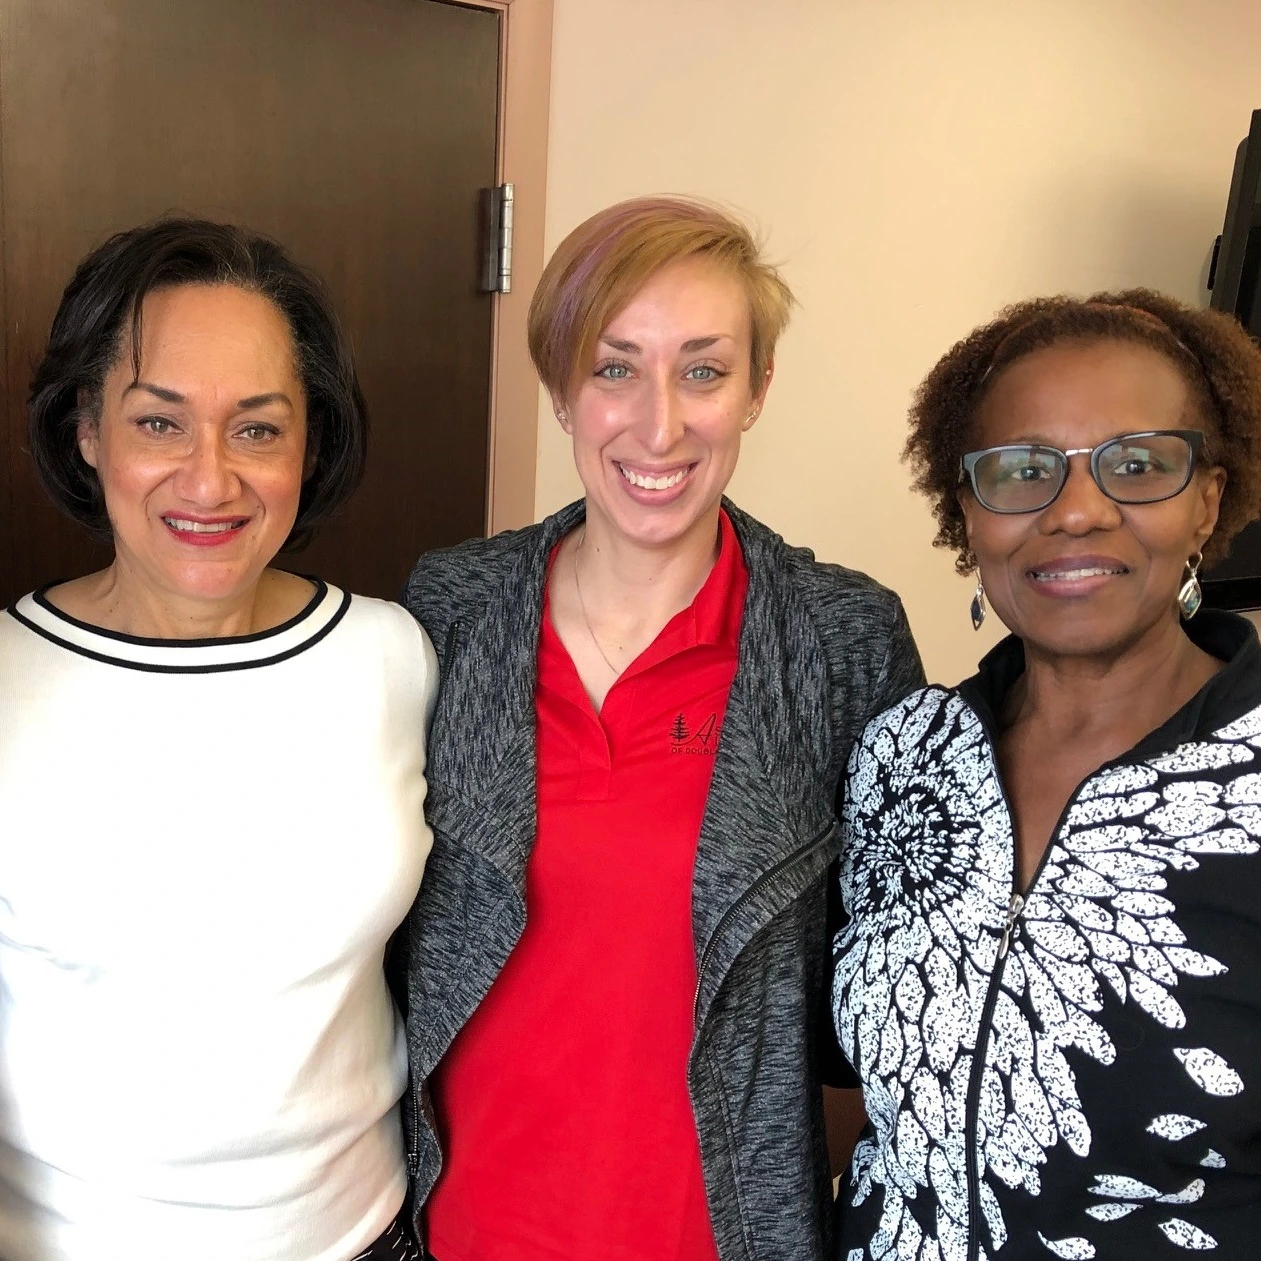 Douglass alumnae post after an AADC Smart Talks presentation hosted on Douglass College campus at Rutgers University that covered healthcare insurance.